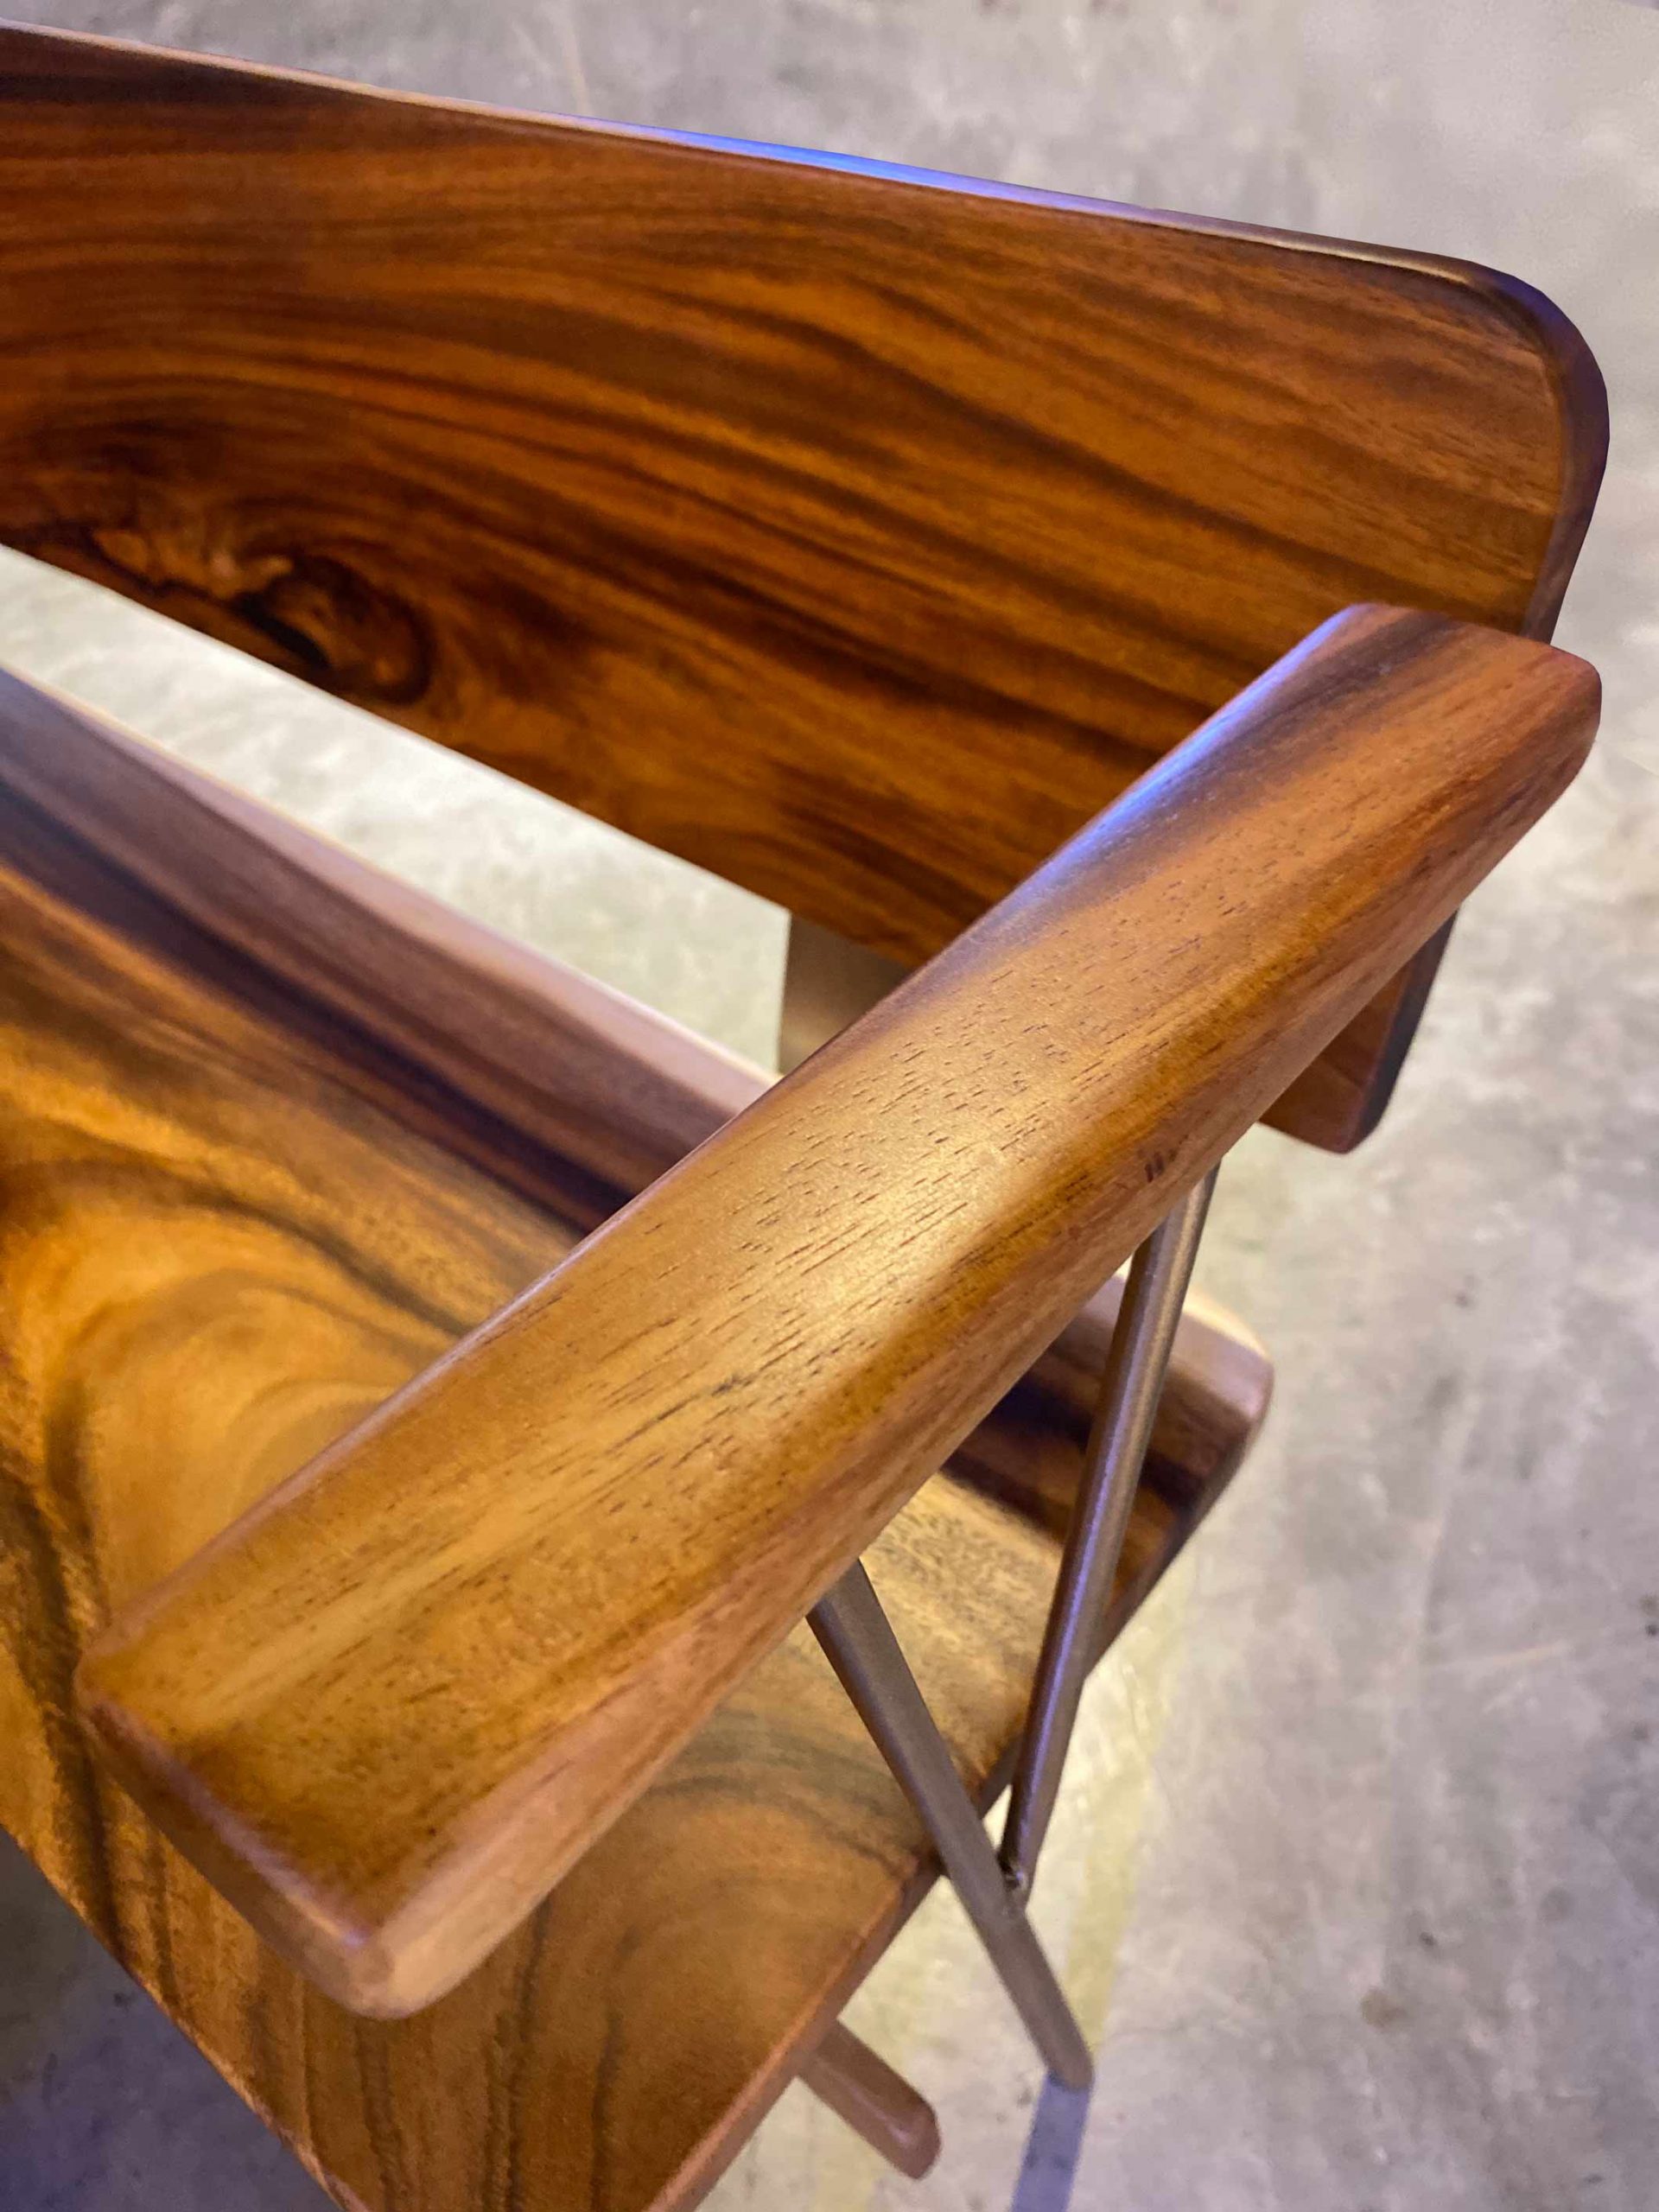 Handcrafted Furniture Singapore Bench Details